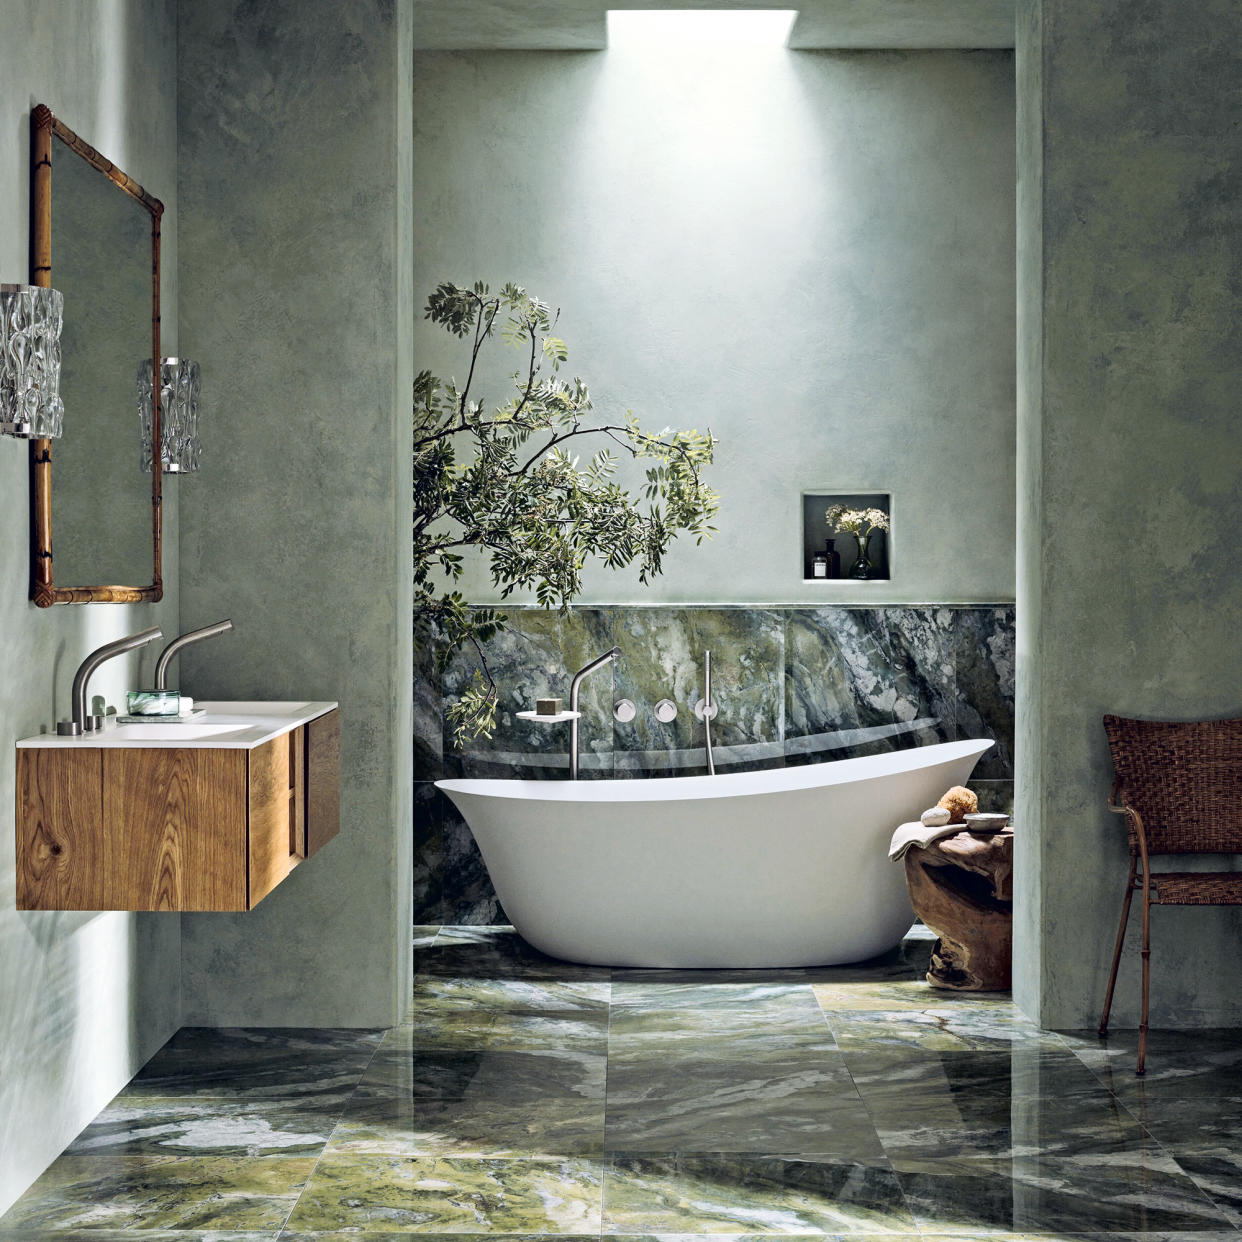  Luxe bathroom with green marble floor, wooden wall-hung vanity and modern white freestanding bath. 